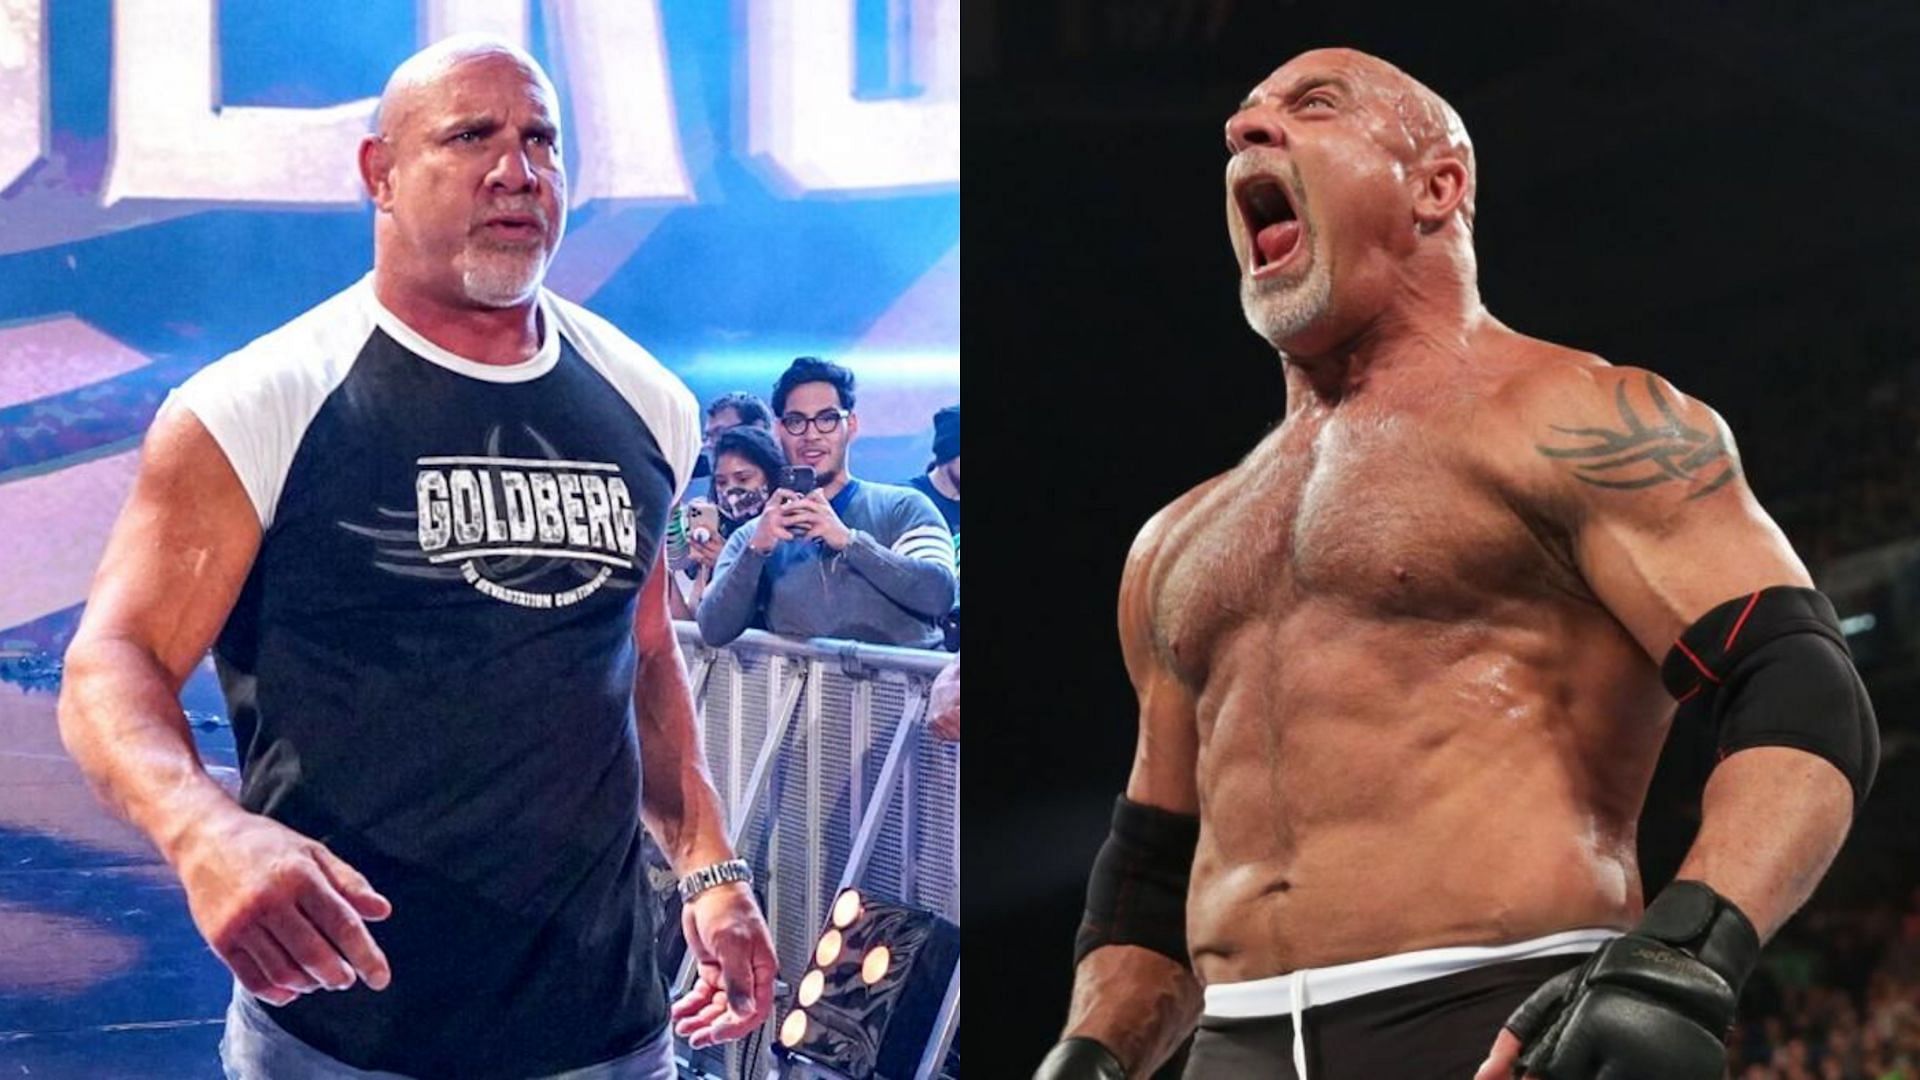 WWE Hall of Famer Goldberg last competed in February 2022